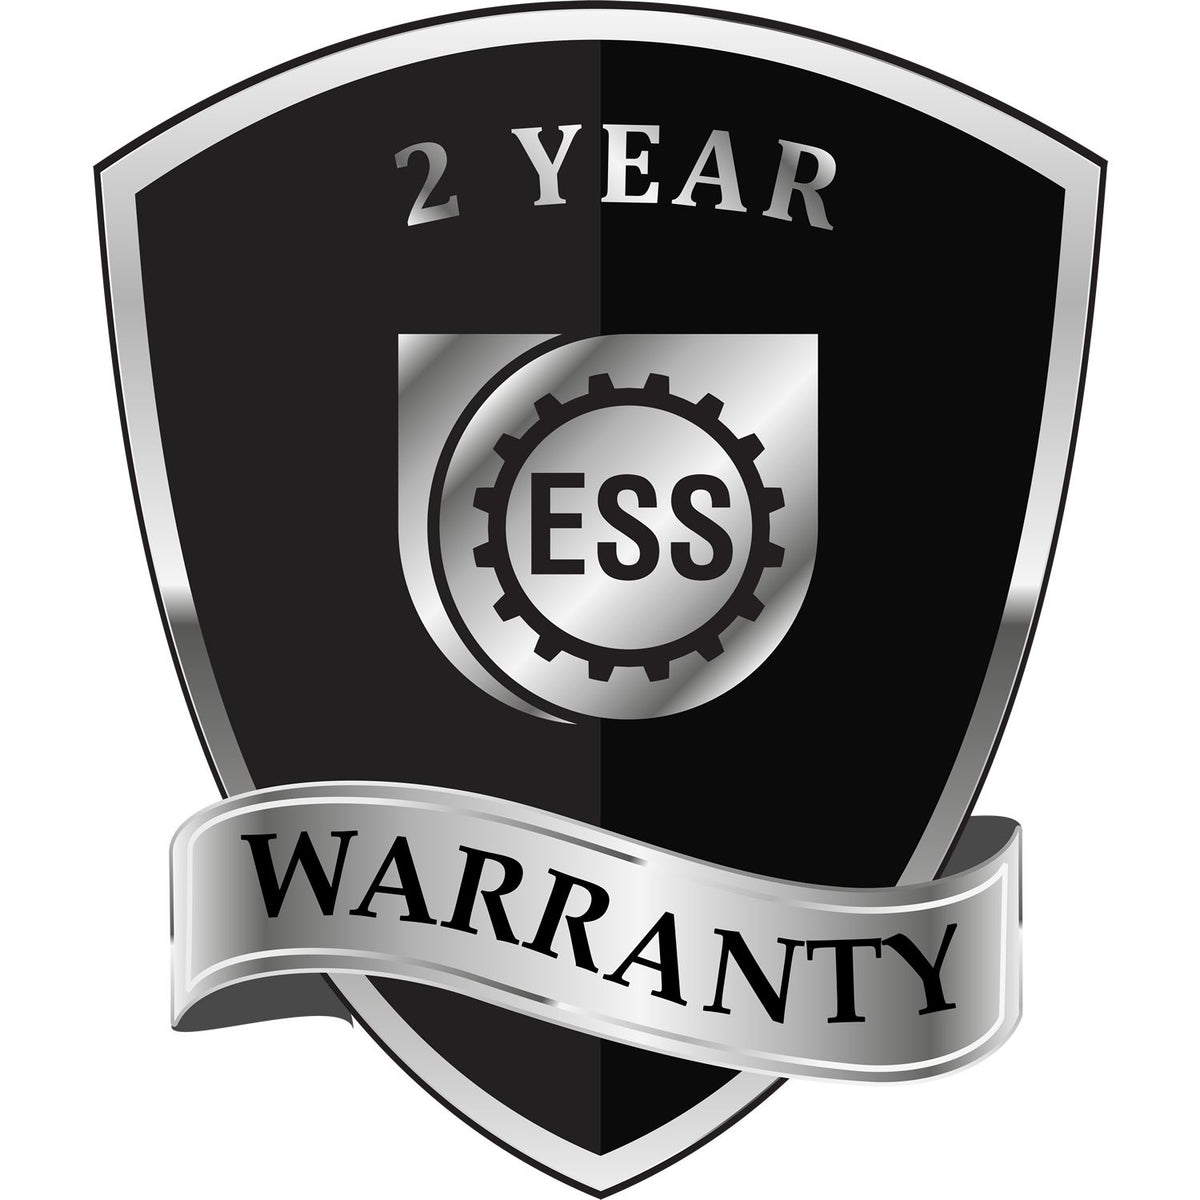 A black and silver badge or emblem showing warranty information for the Soft Iowa Professional Geologist Seal